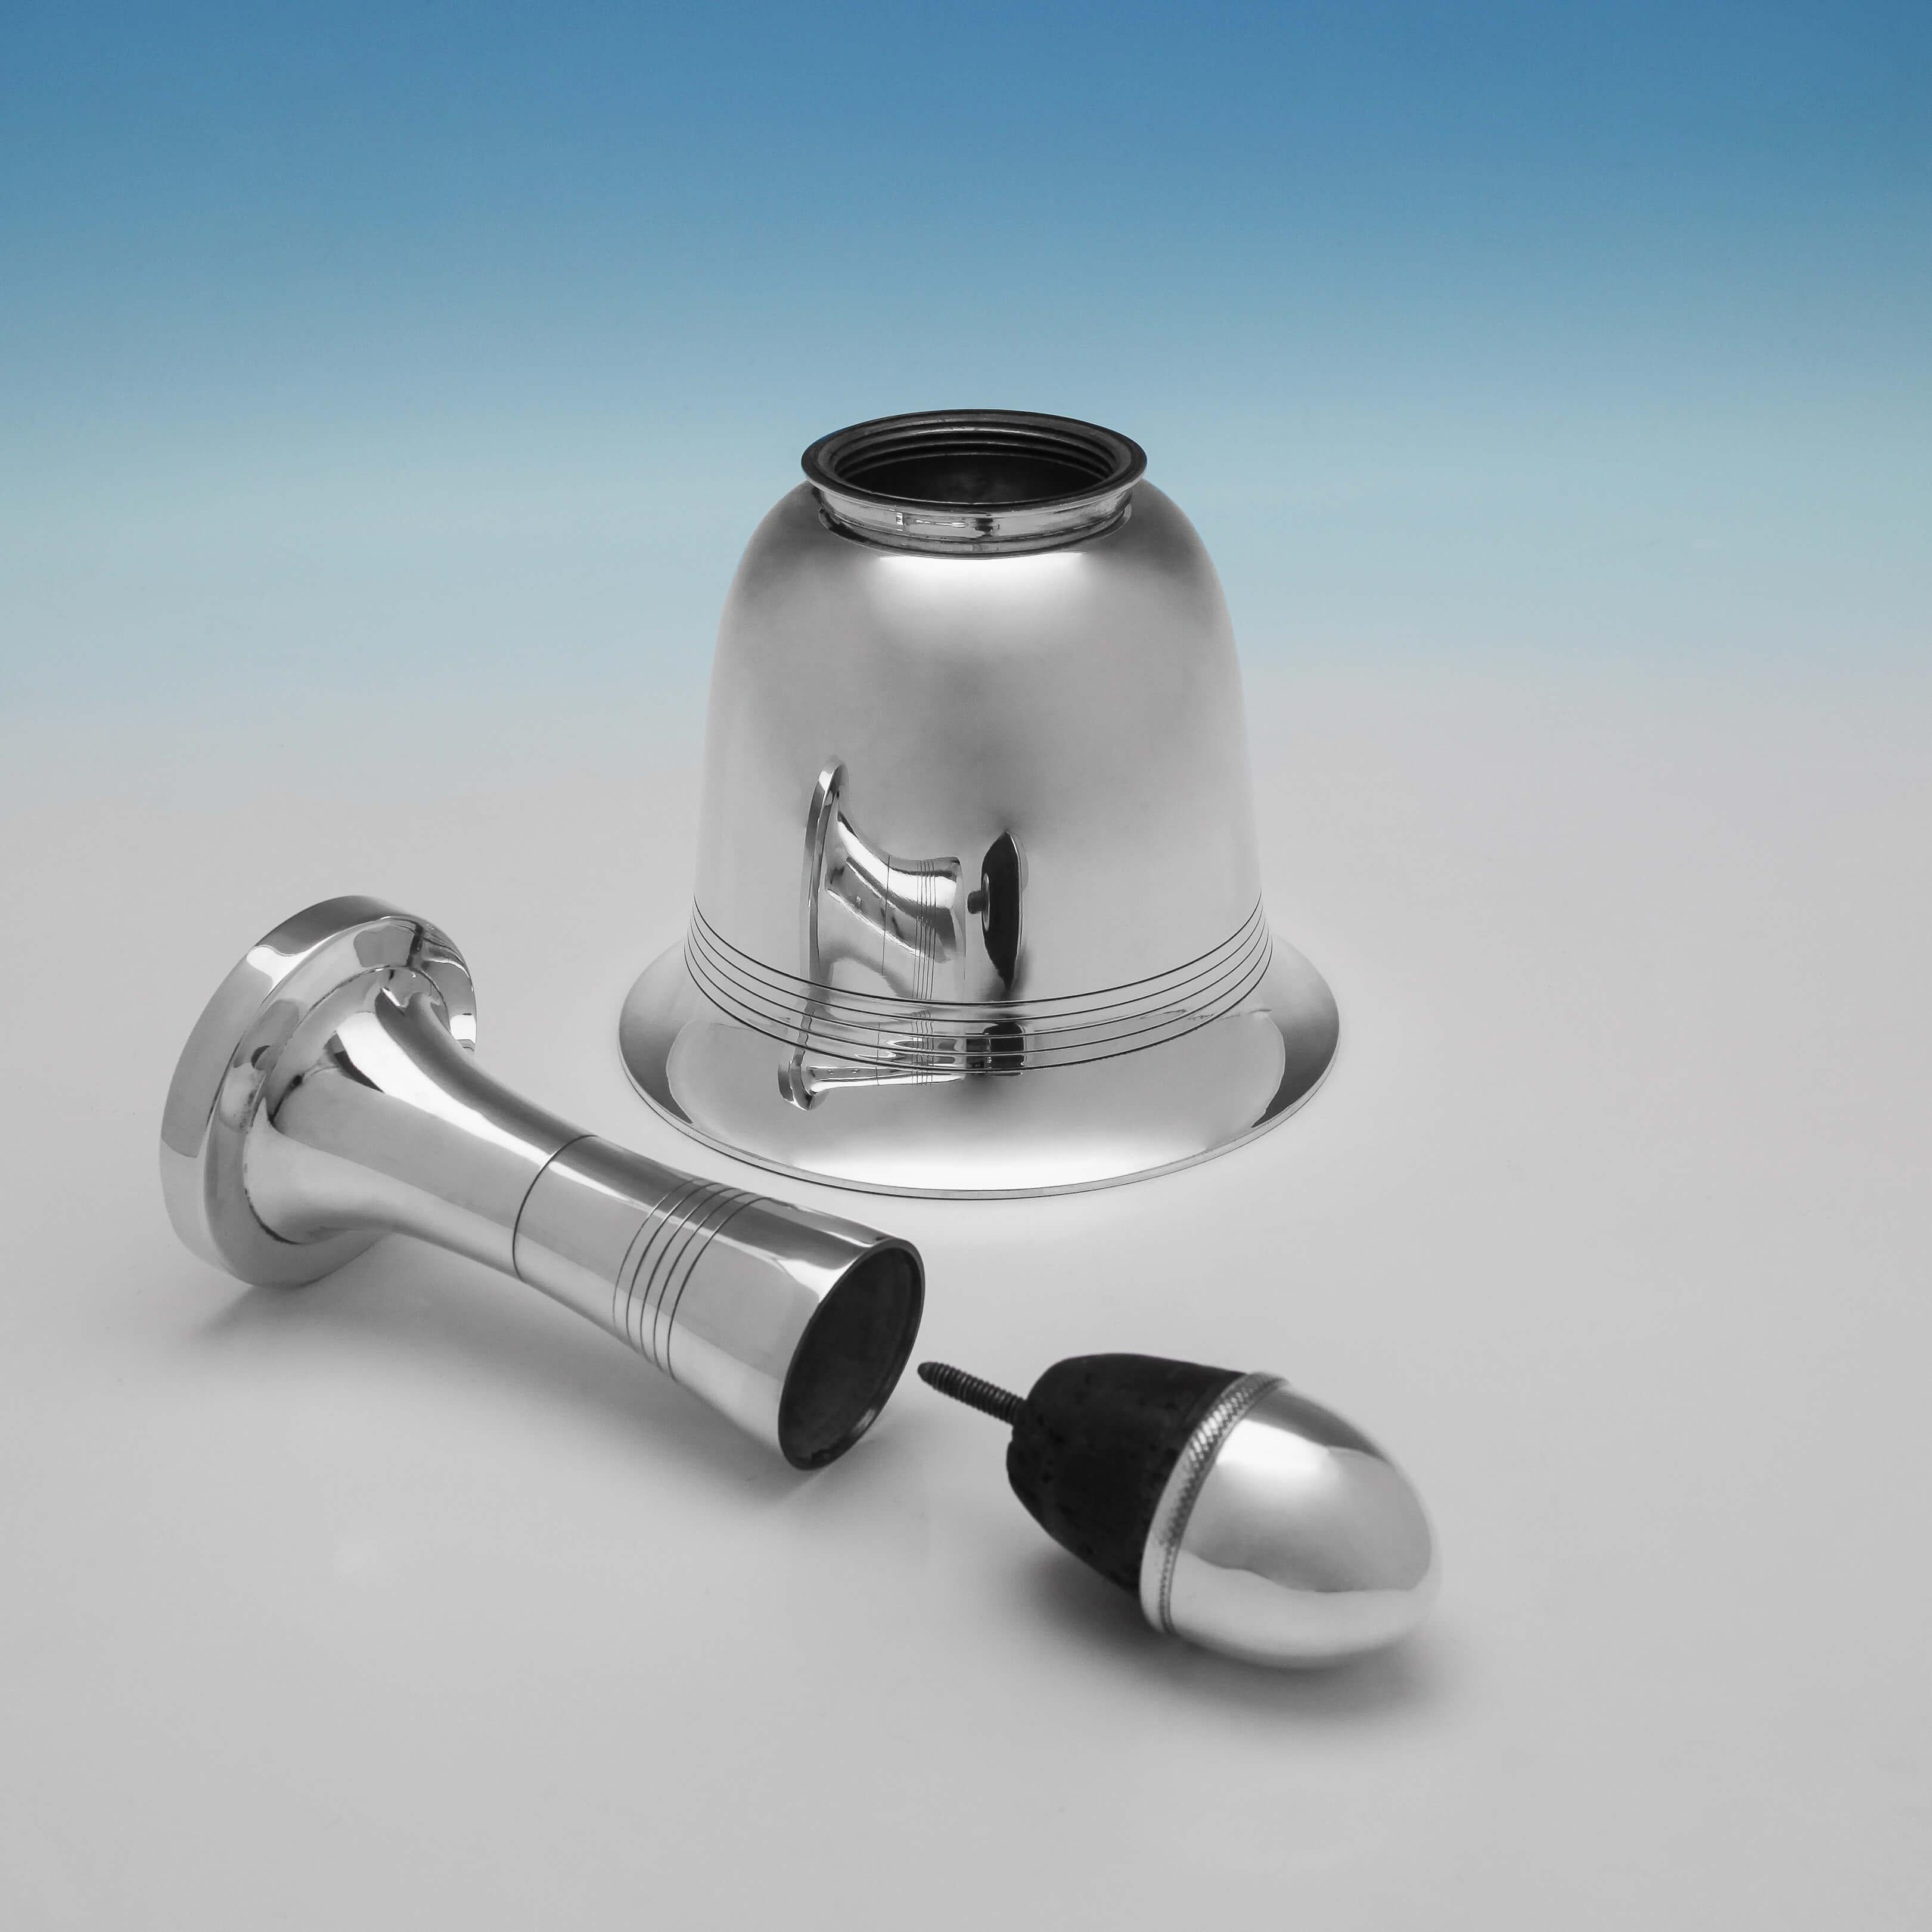 English Dunhill Art Deco Silver Plated Novelty Bell Design Cocktail Shaker